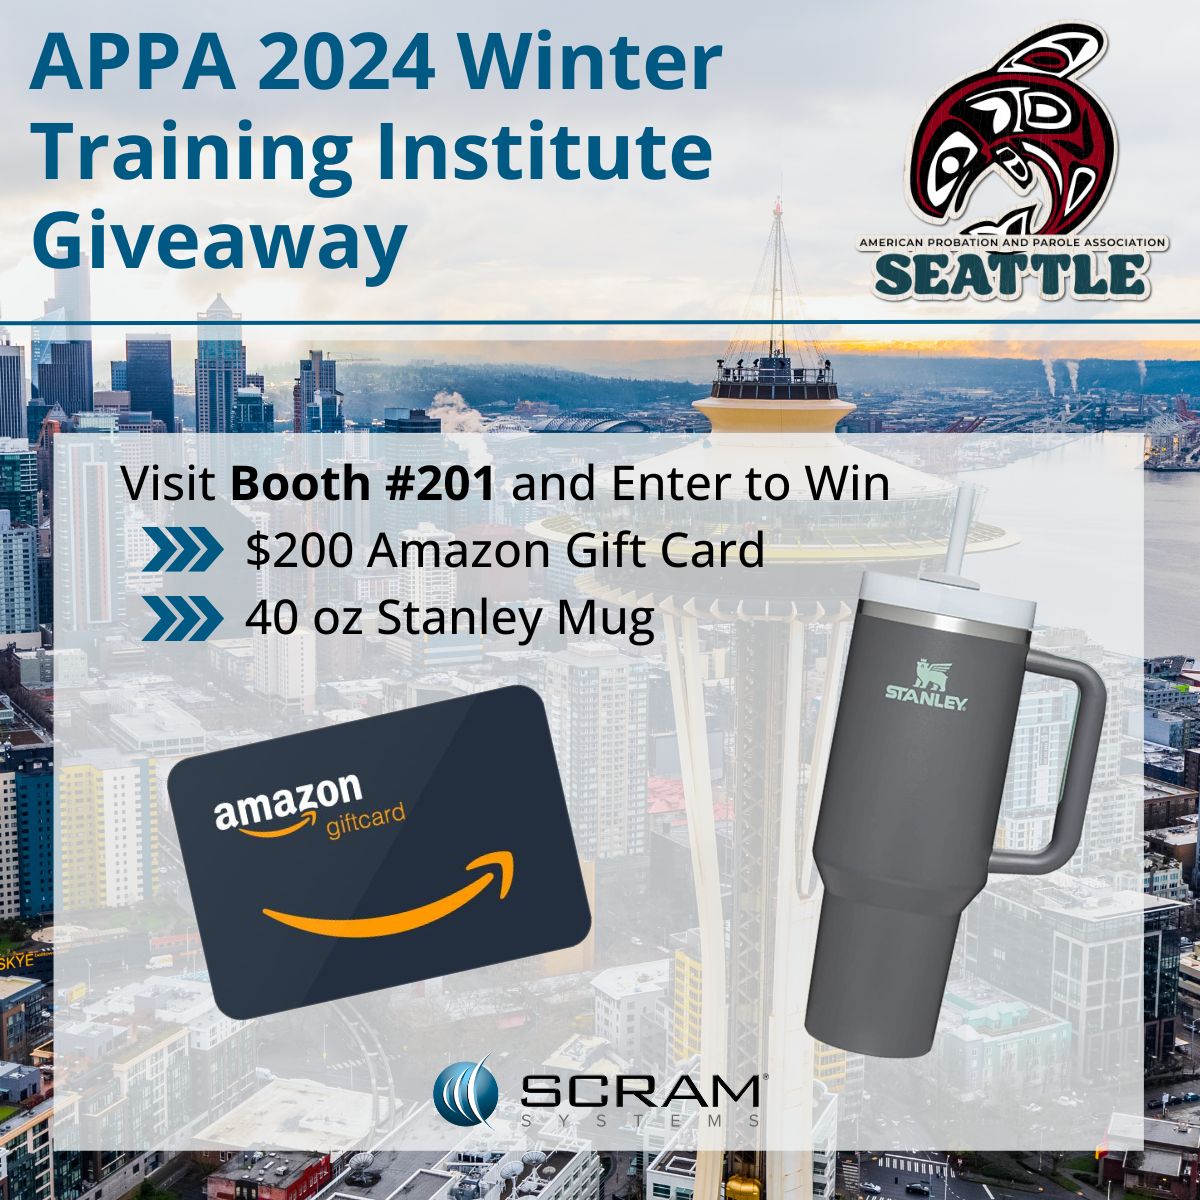 The APPA Winter Training Institute is just days away! Stop by SCRAM Systems Booth 201 to learn how our electronic monitoring solutions and software support probation departments and streamline client supervision.

#MakingADifference #APPA2024 #CommunityCorrections #Probation